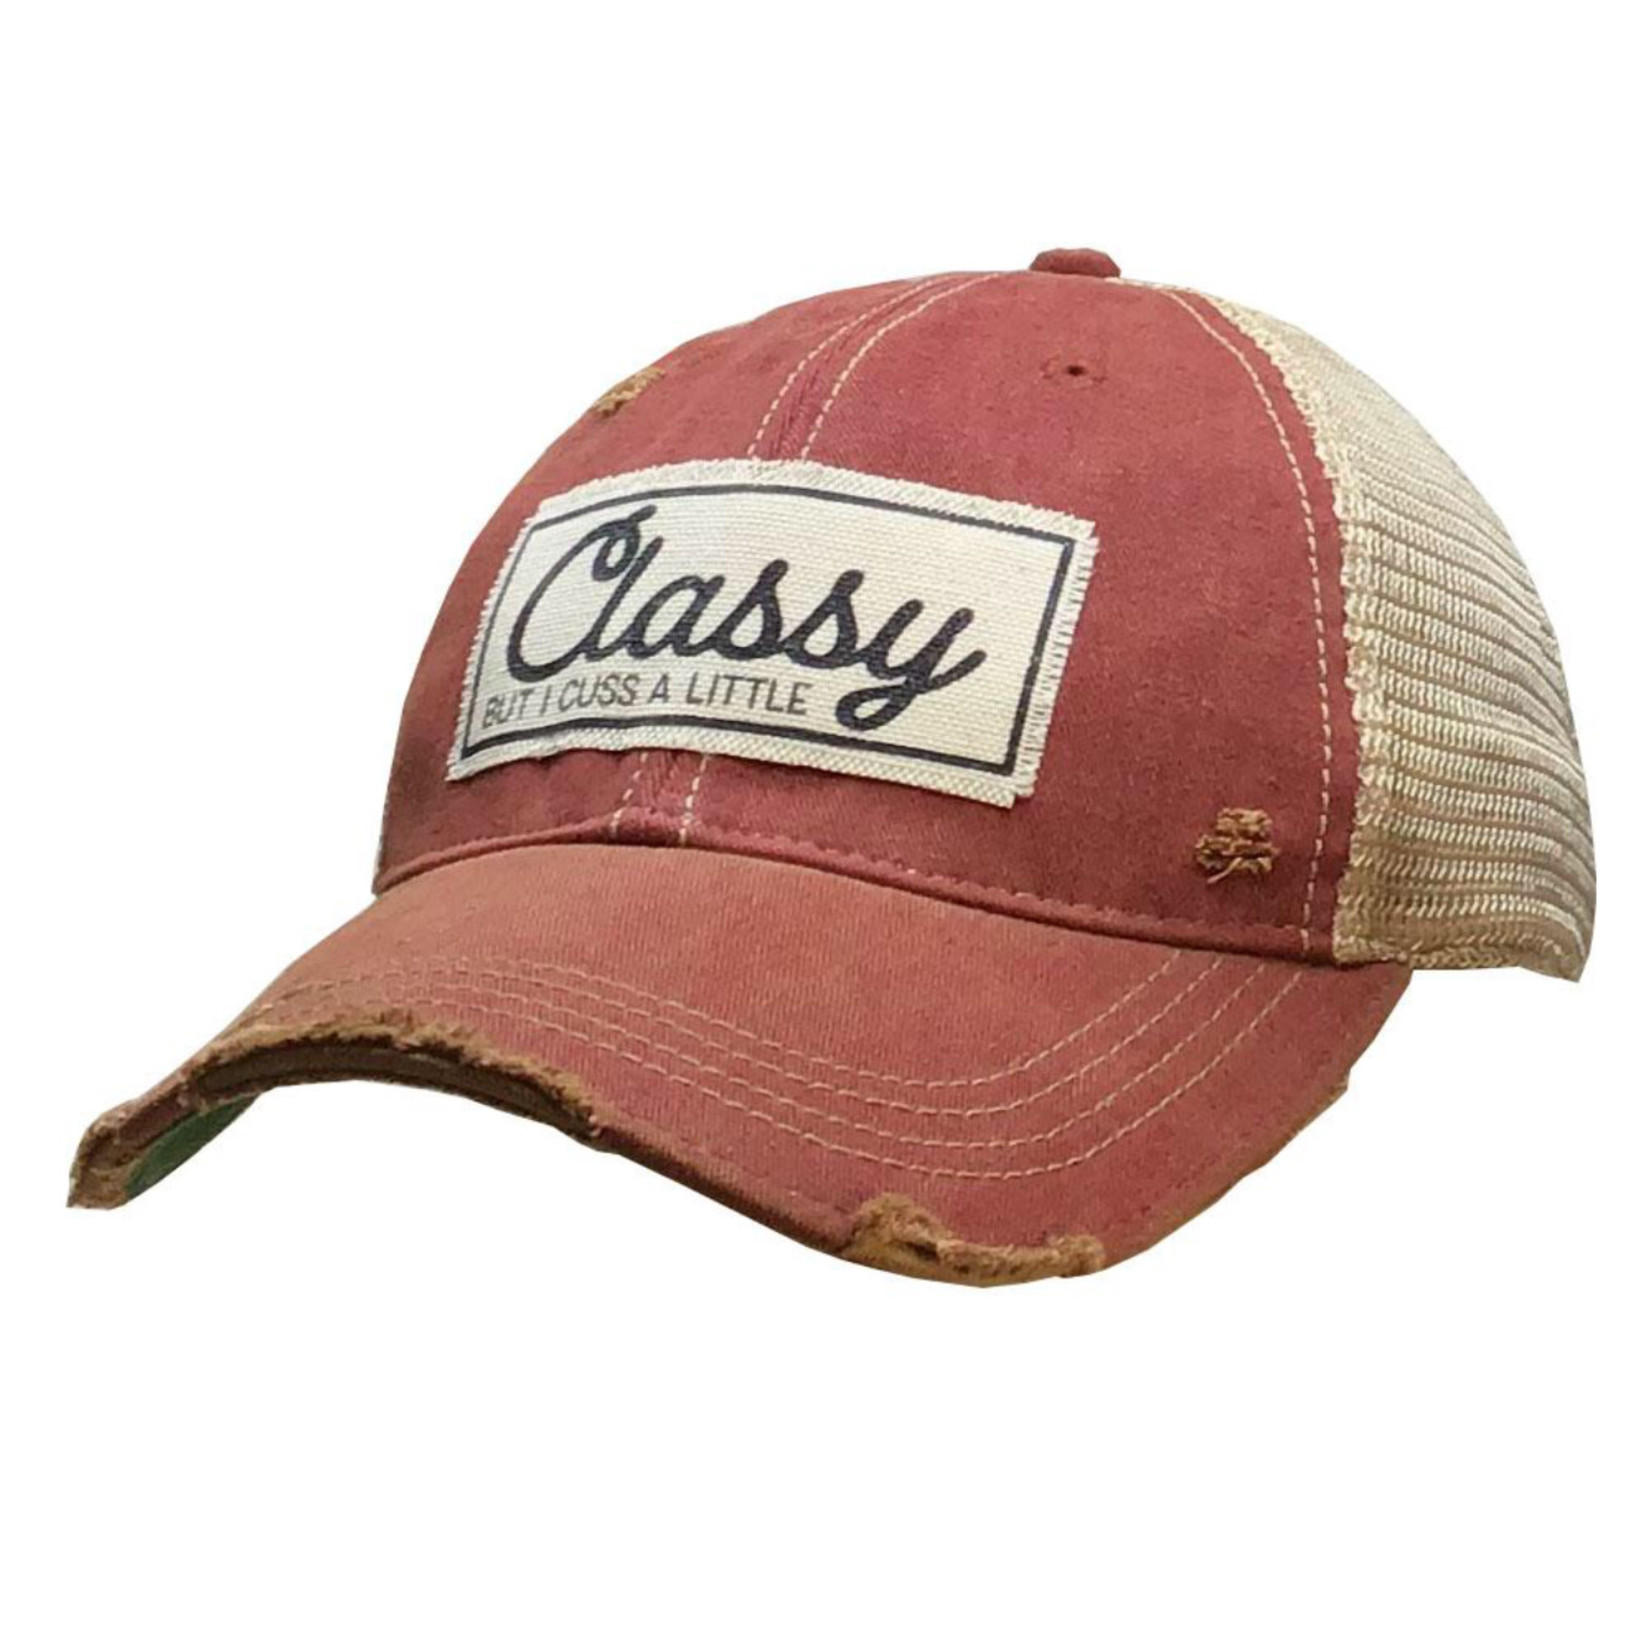 Vintage Life “Classy But I Cuss A Little” Distressed Trucker Cap - Dark Red